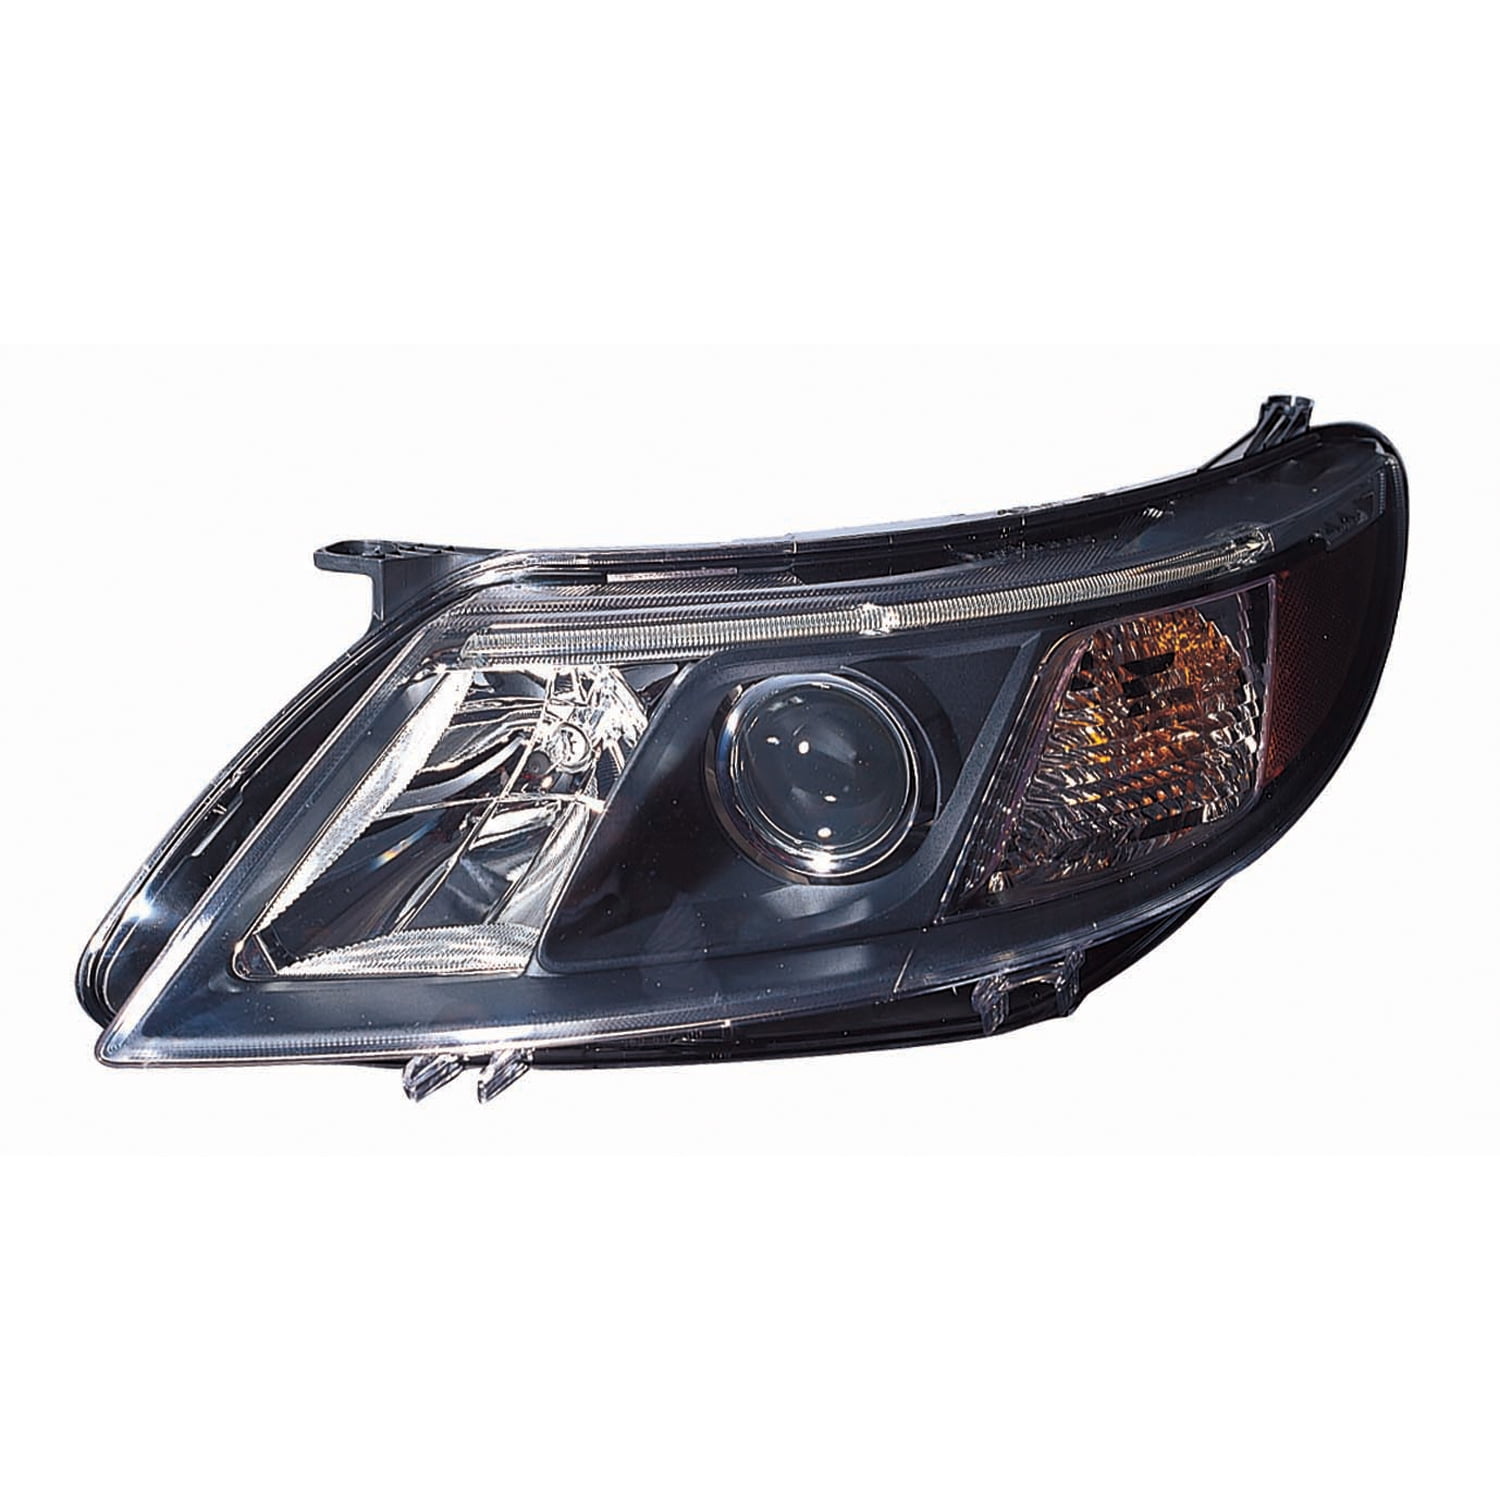 GO-PARTS Replacement for 2008 - 2010 Saab 9-3 Front Headlight Assembly ...